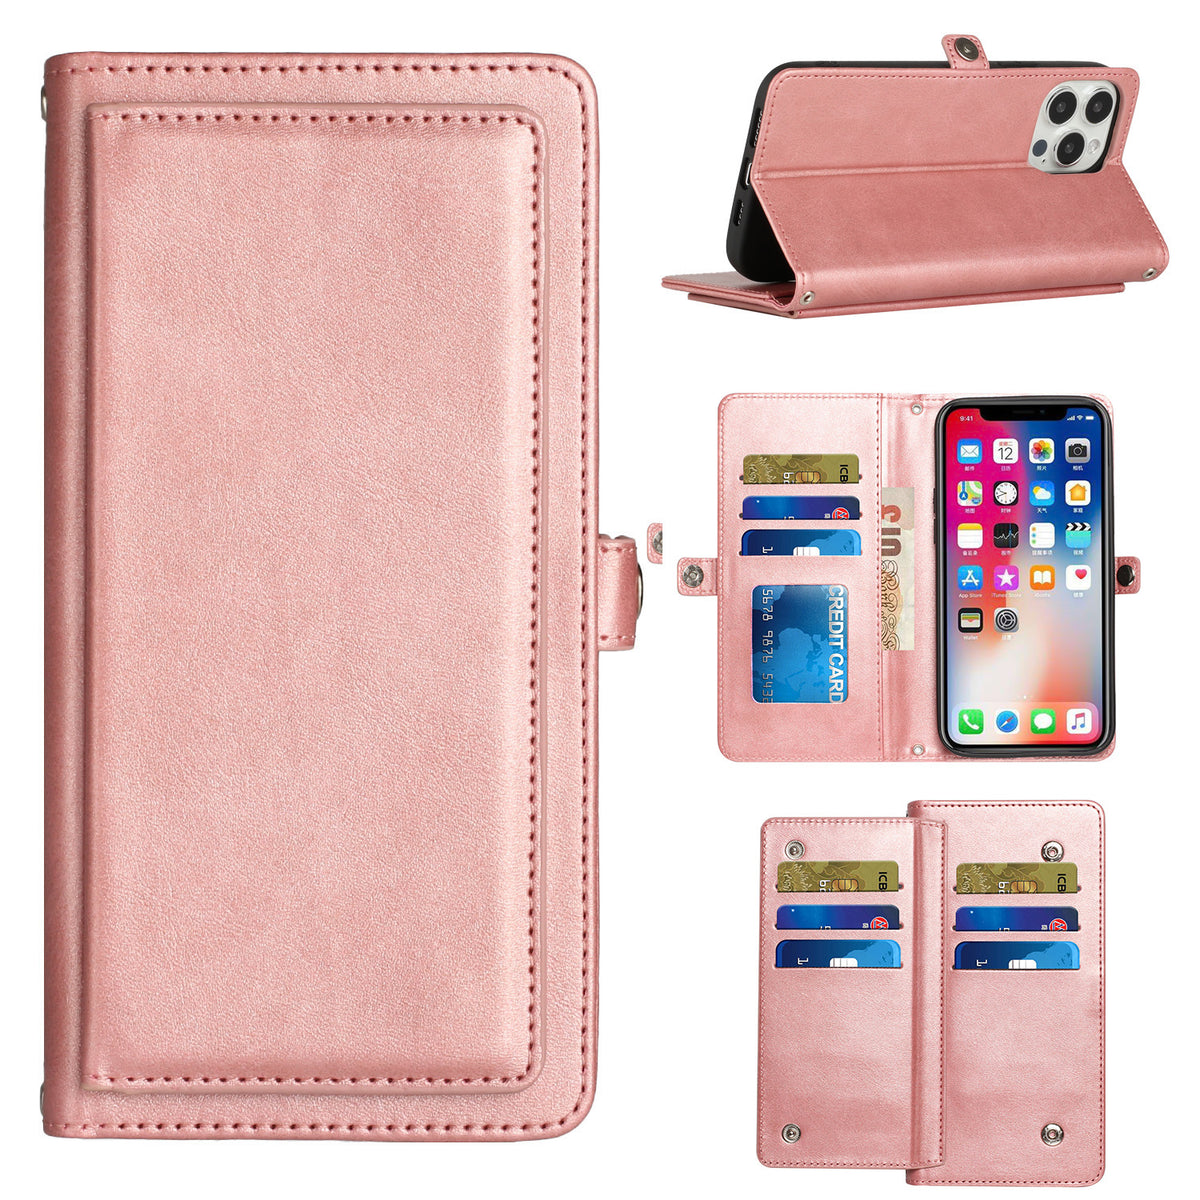 Iphone 11 (6.1Inch) Wallet Flip Case with 9 card slots button lock Rose Gold